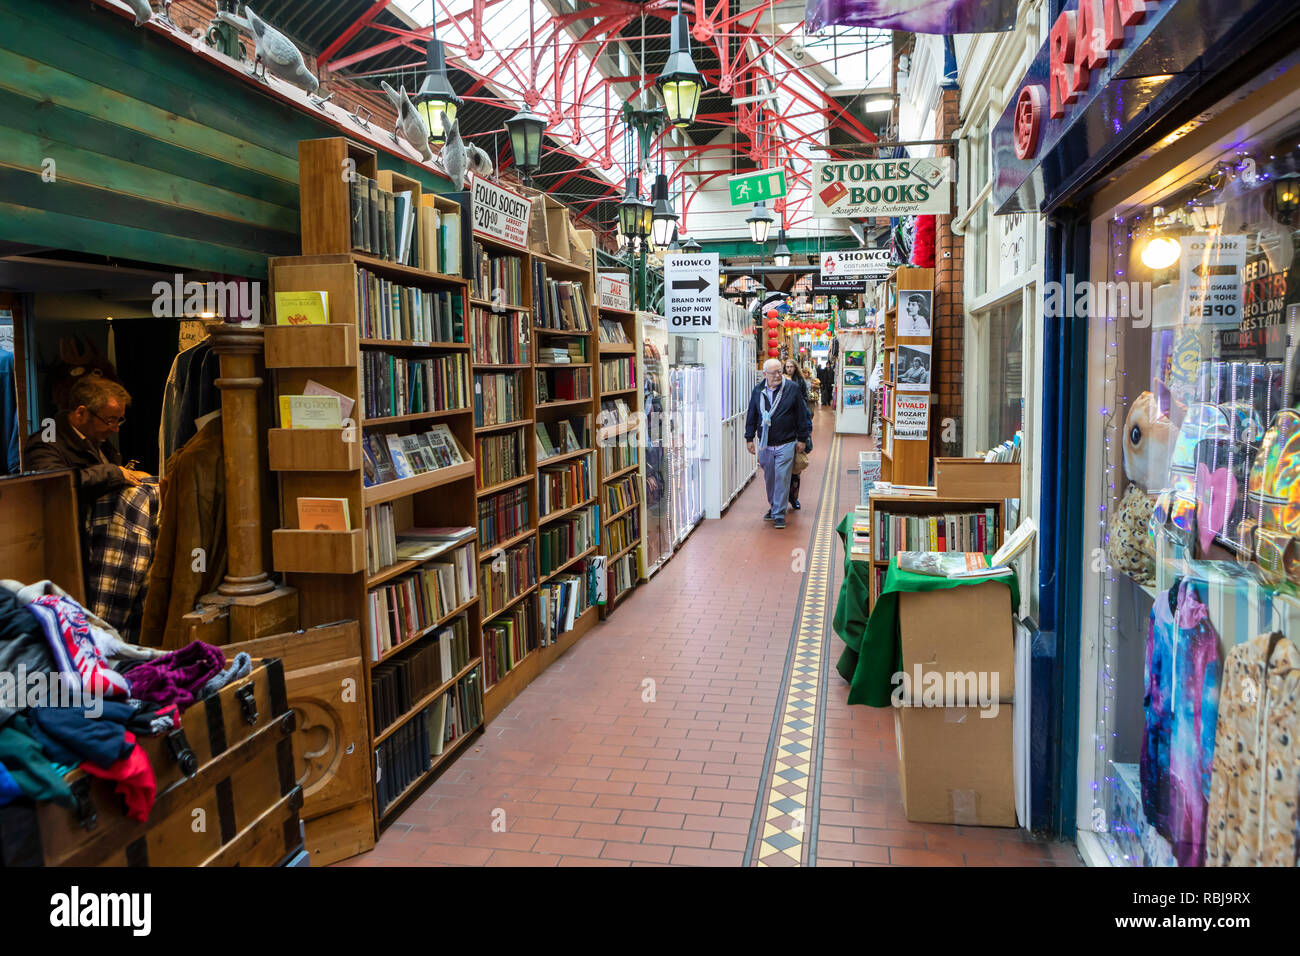 Small shoppes inside George's Street Arcade on South Great George's Street in Dublin, Ireland. Stock Photo